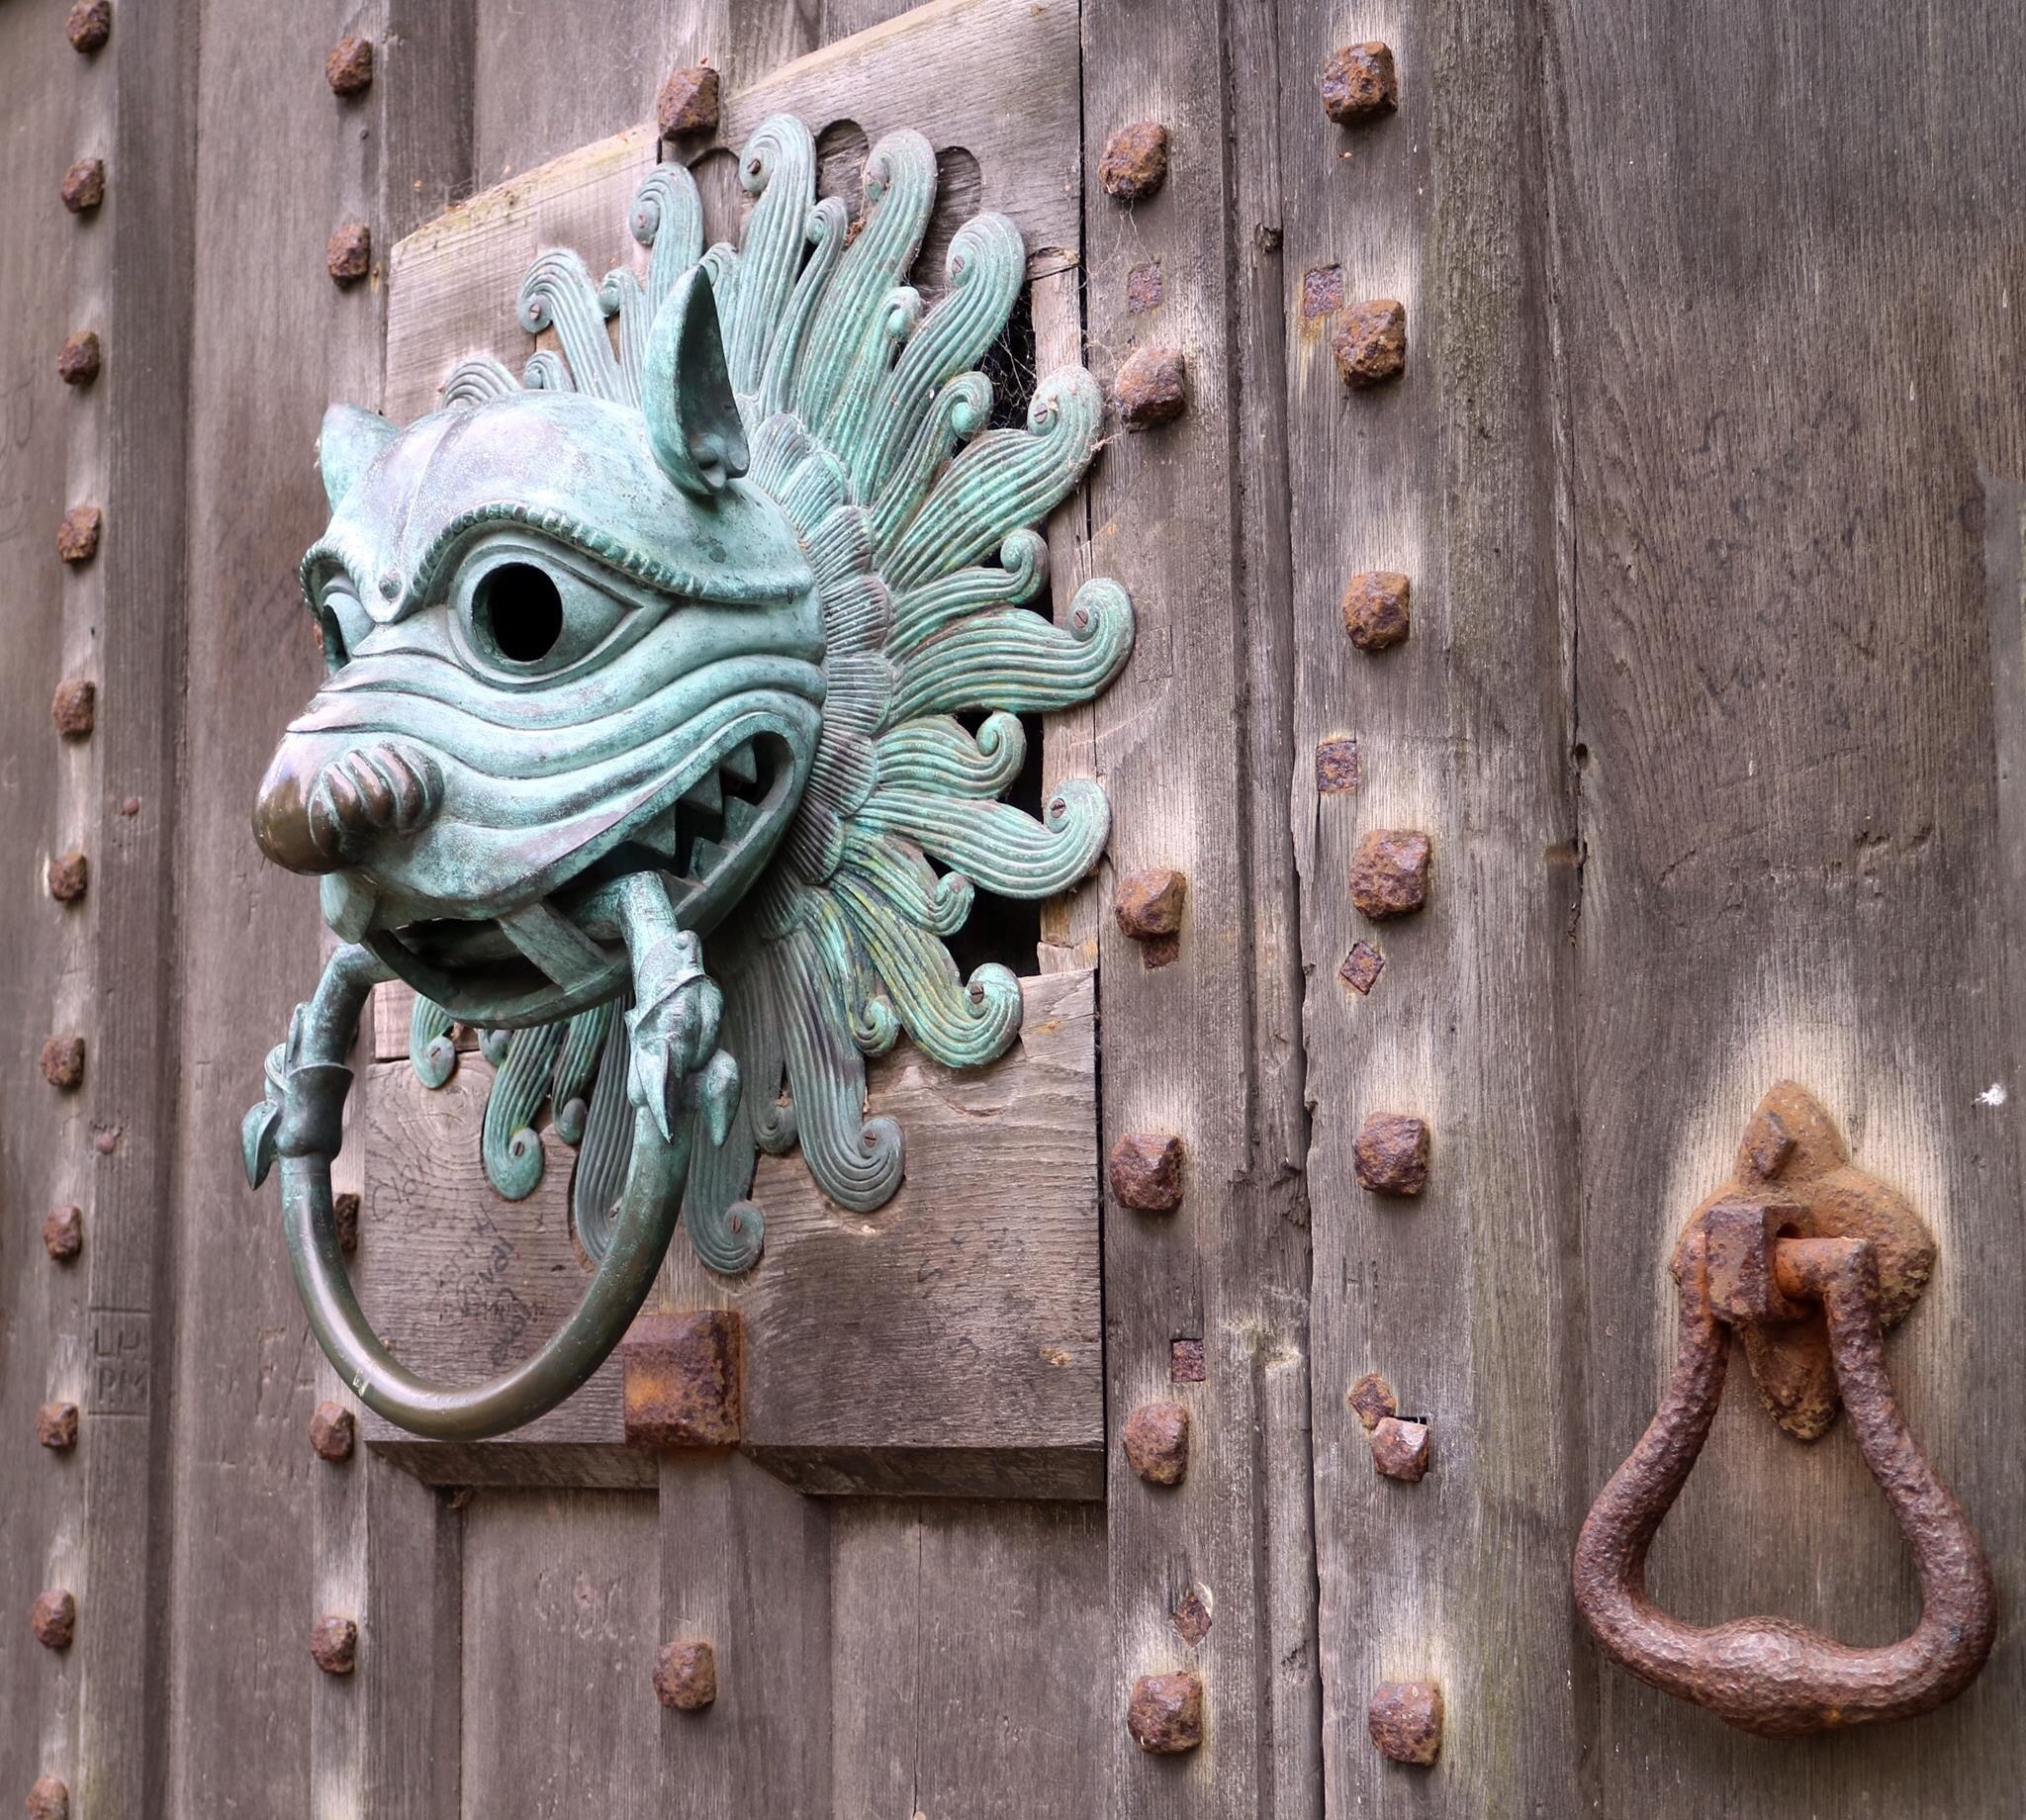 Knocker on door with sanctuary ring